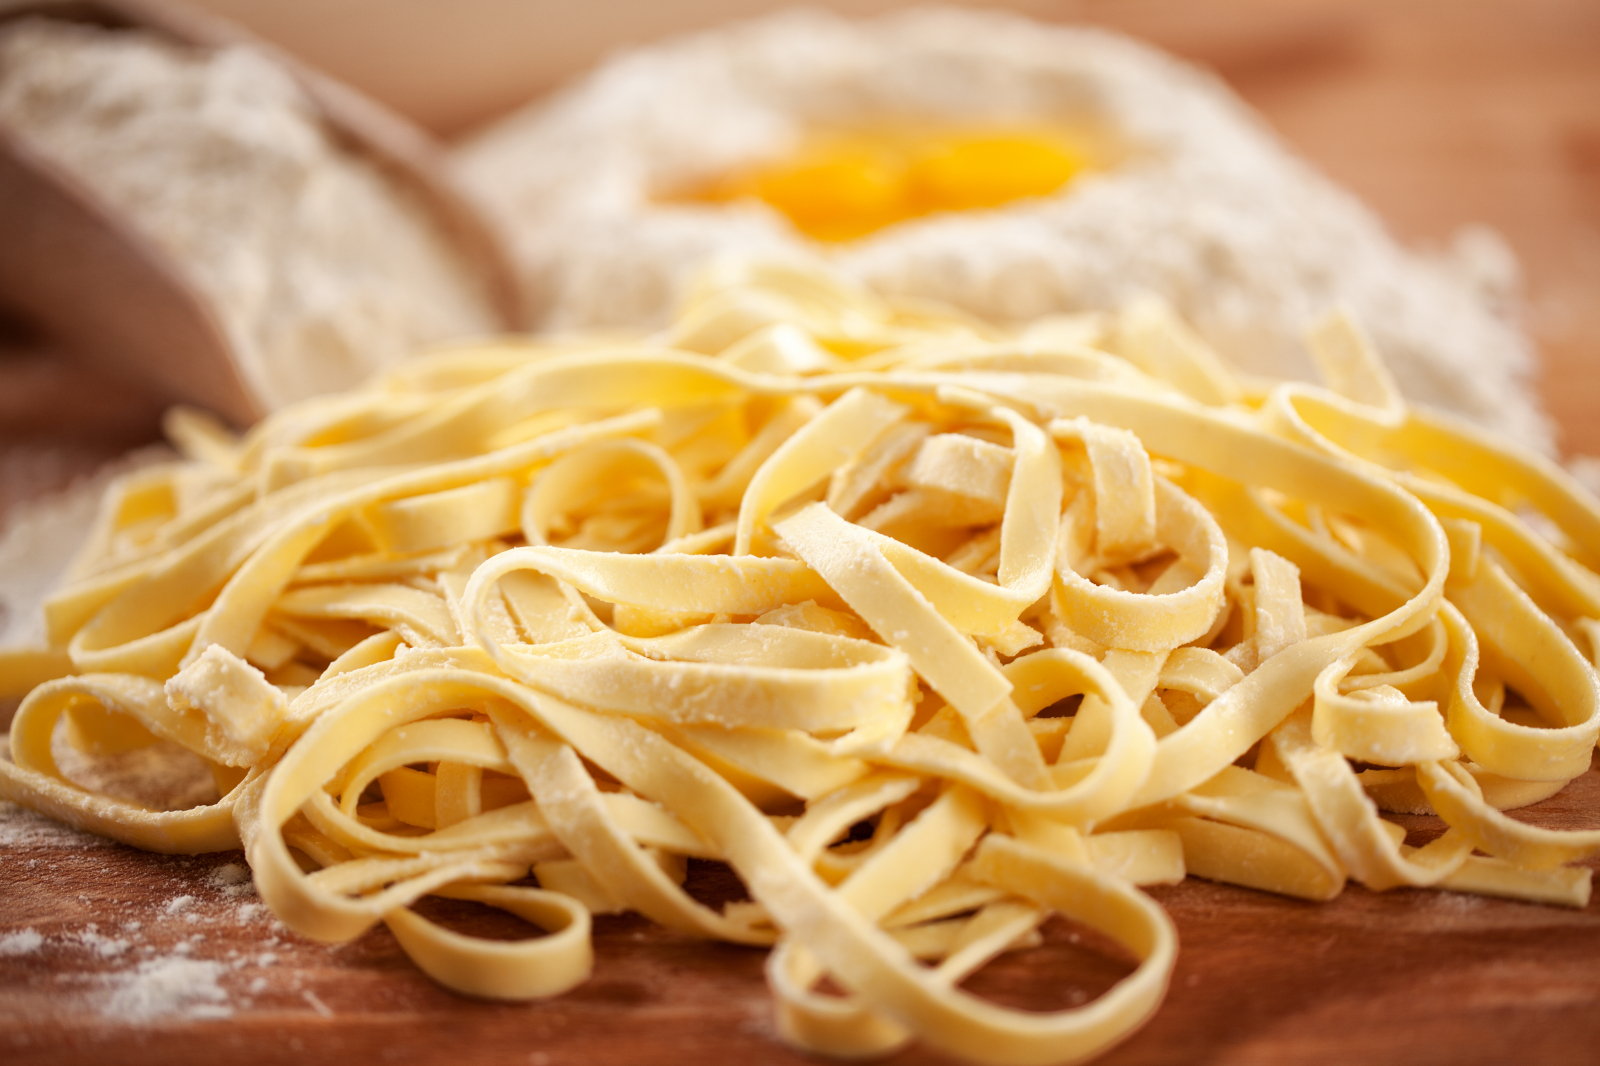 The Genius Way to Make Homemade Pasta without a Machine